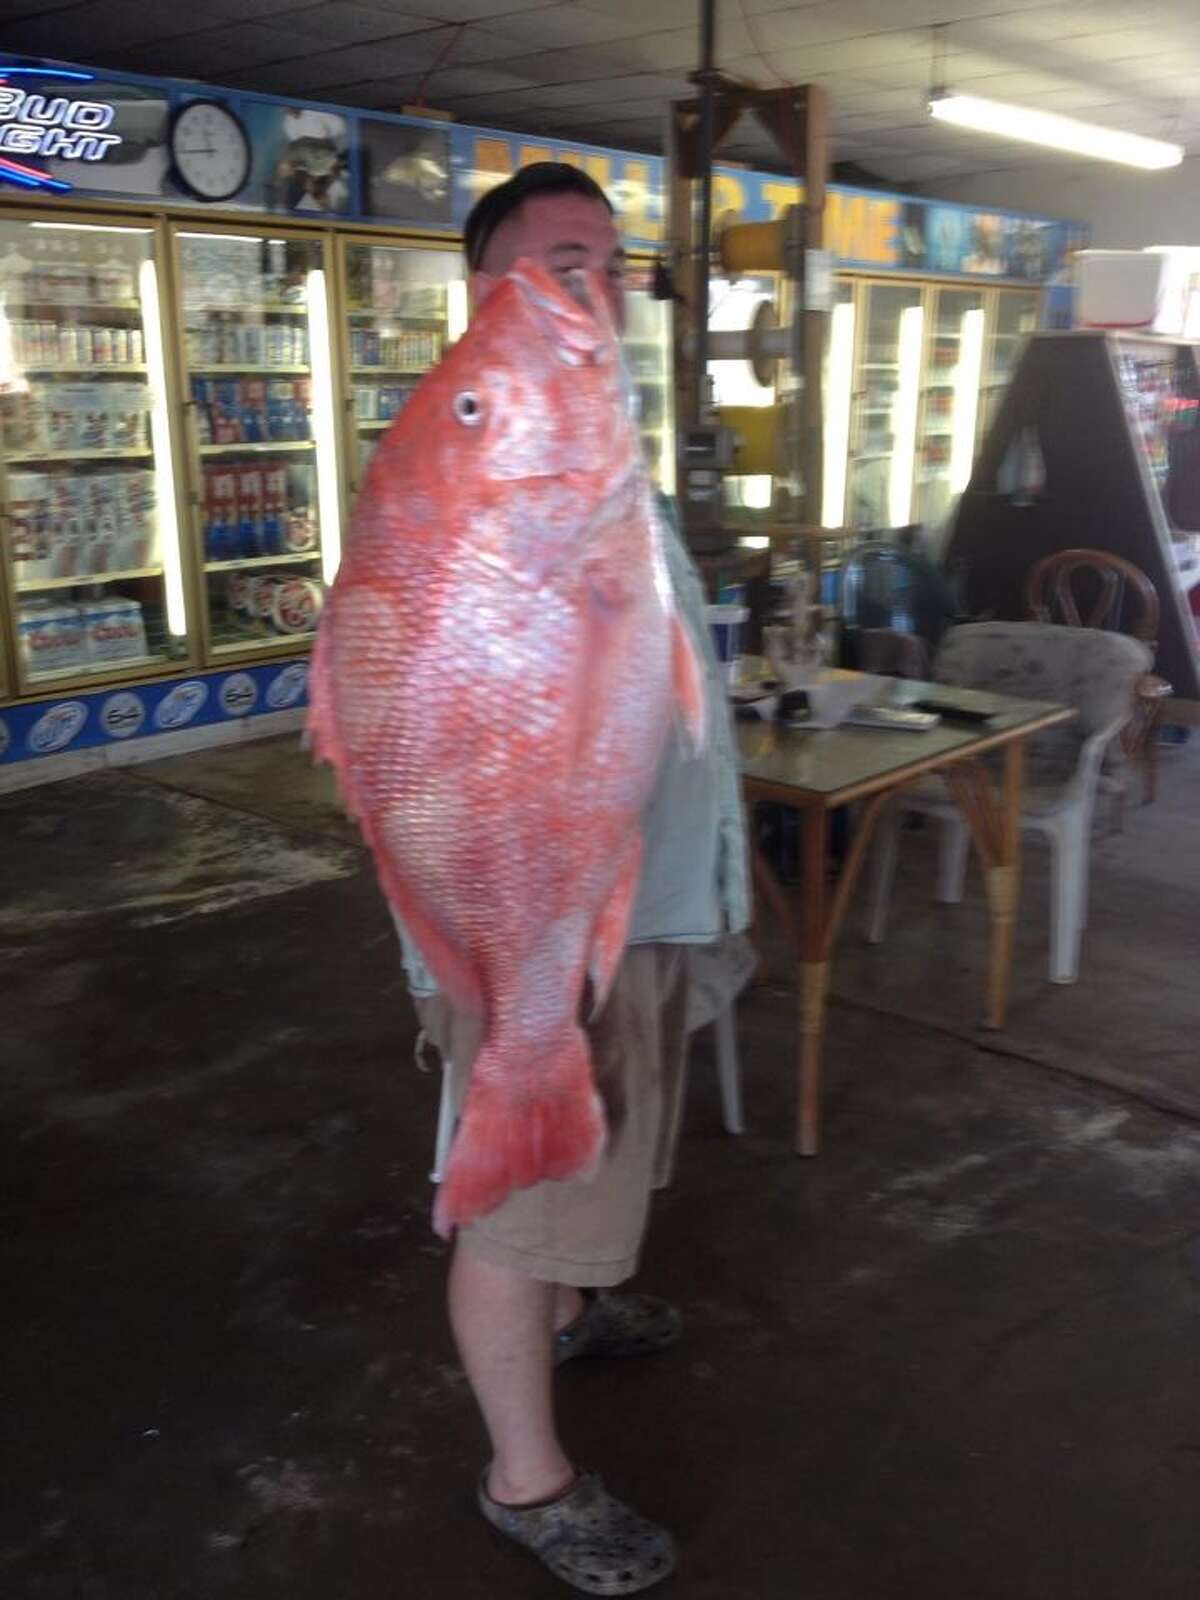 Joey Beaver, of Victoria, broke the state record for Red Snapper caught in saltwater with a catch of 40-pounds and 38.75 inches on June 1, 2014.